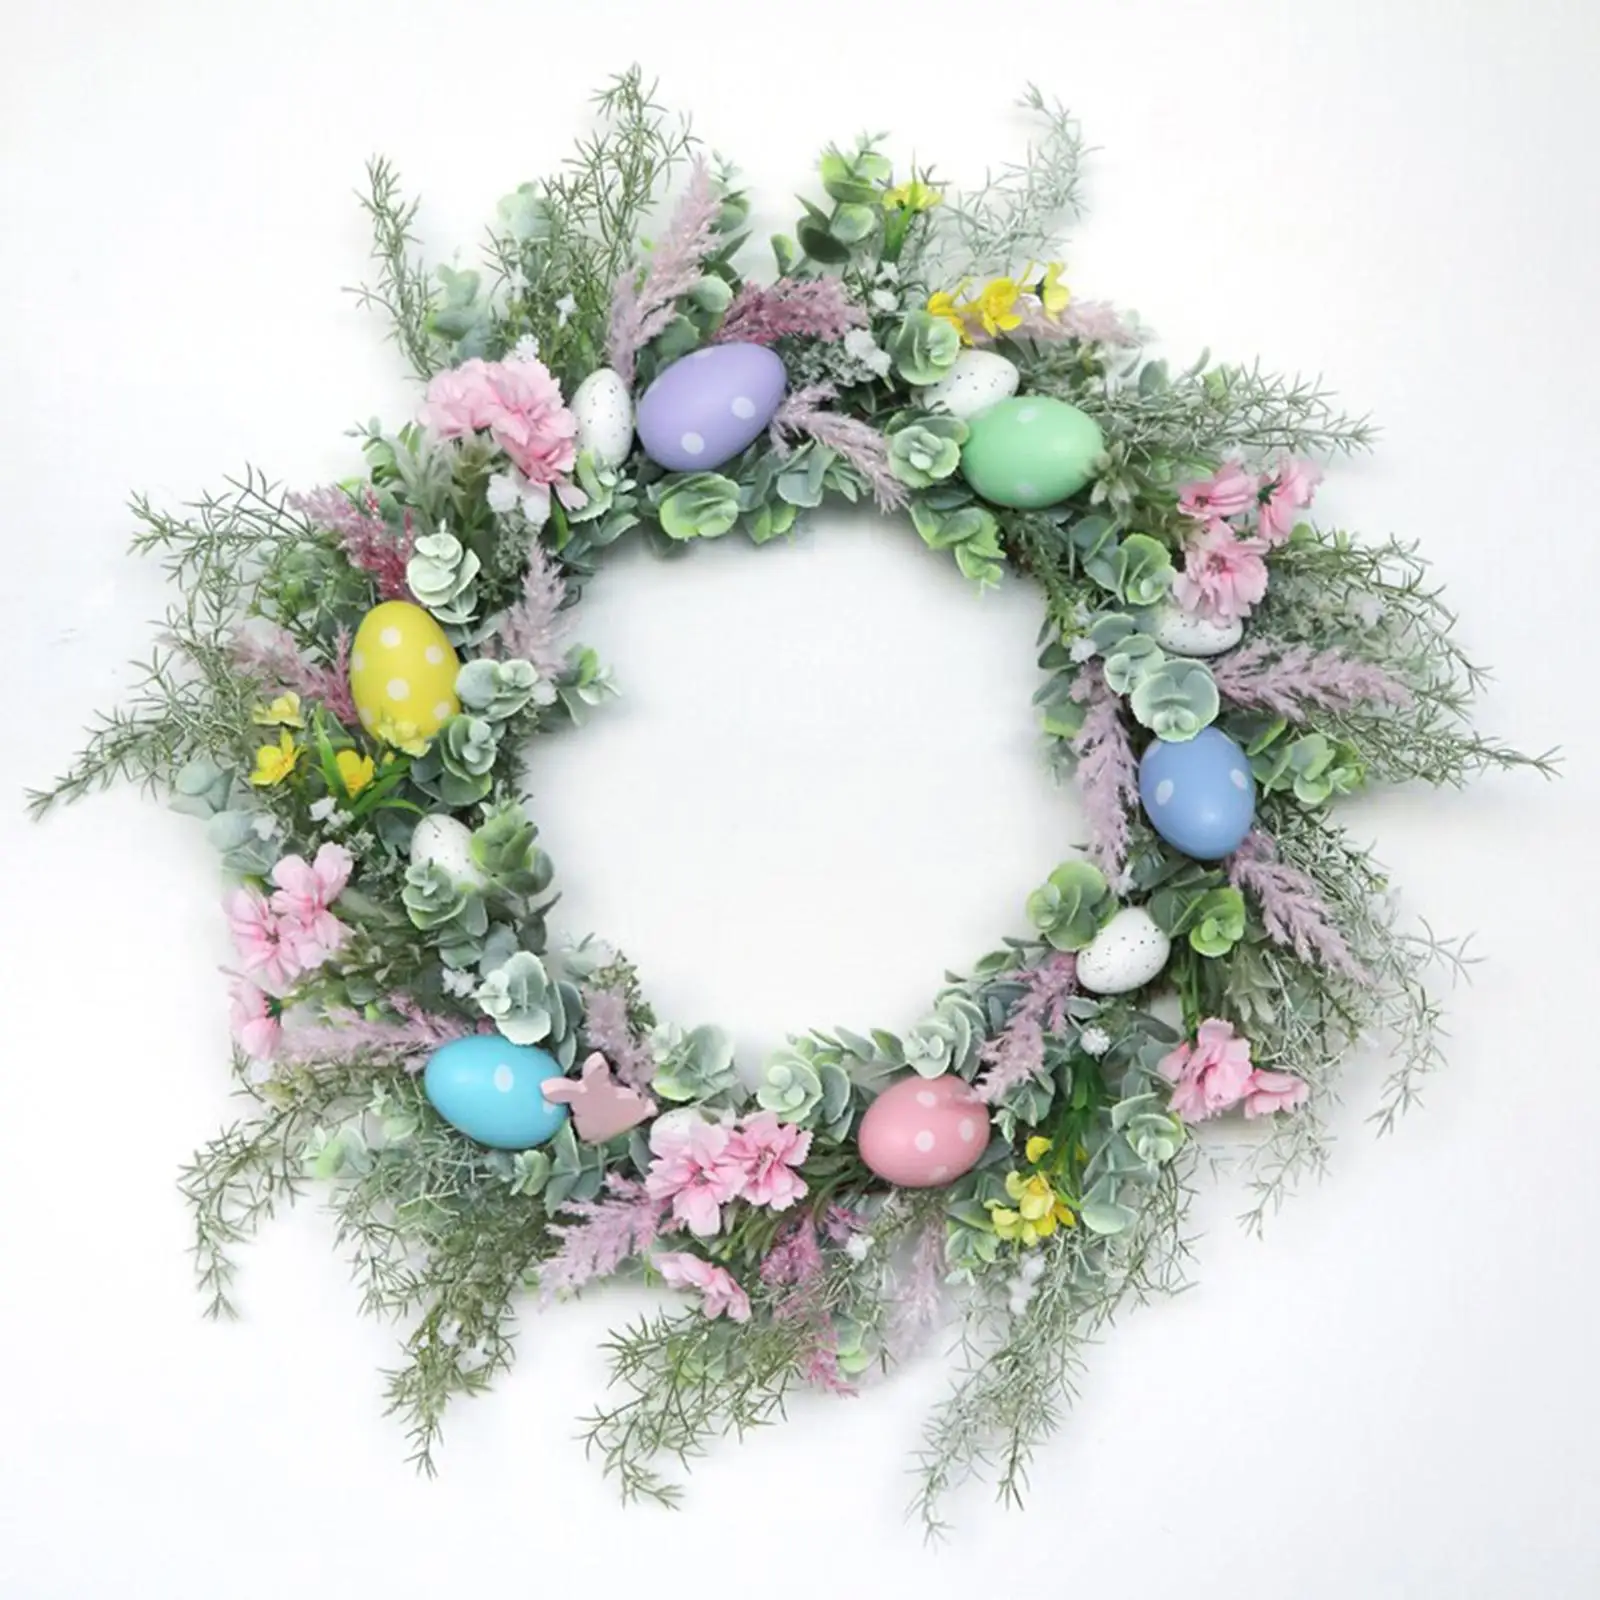 45cm Easter Egg Flower Garland, Front Door Wall Hanging, Window Decorative Greenery Garland for Home Decor